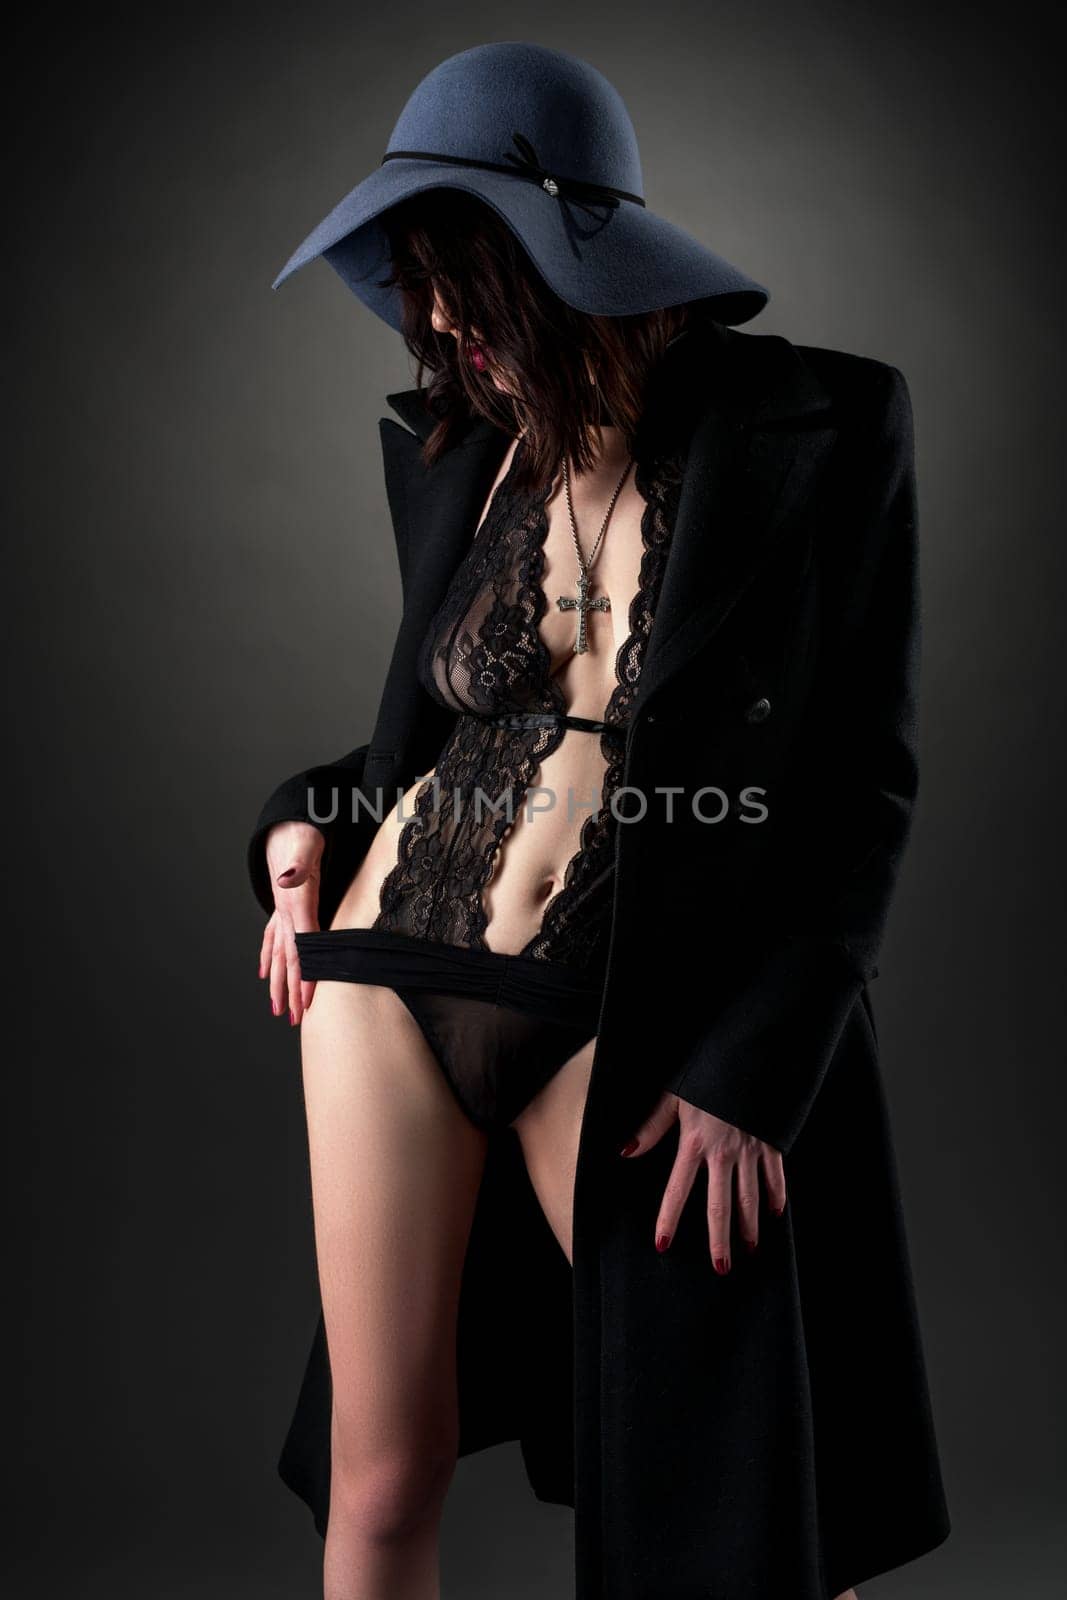 Stylish model dressed in lace bodysuit, coat and hat